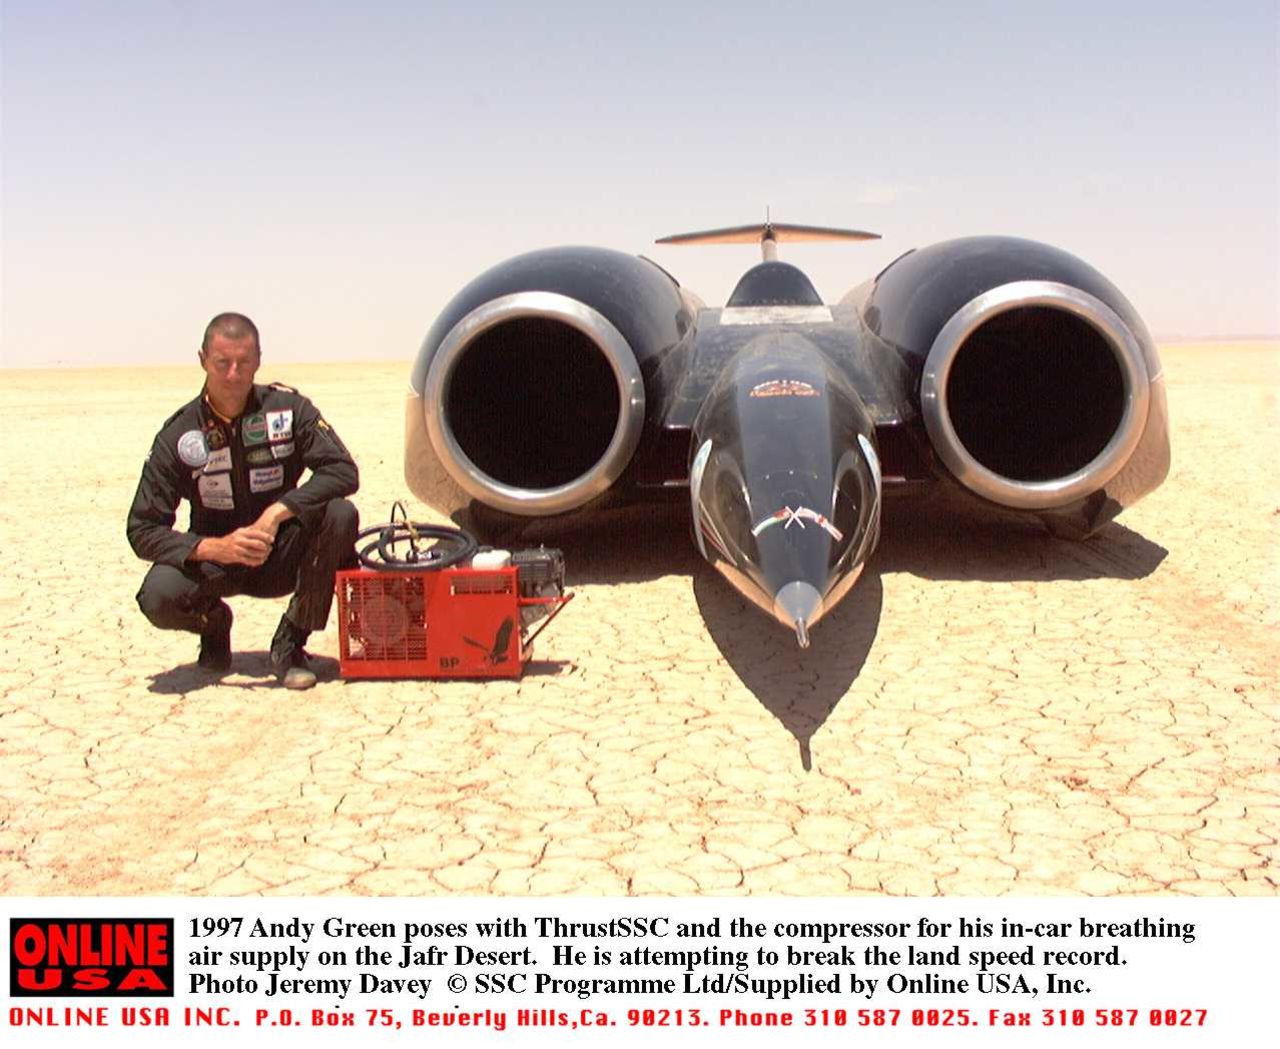 As Venturi seeks to break the electric land speed record, the VBB-3 is nowhere near the overall record, set by the rocket-powered Thrust SSC -- driven by Andy Green in 1997 -- which reached a speed of 763.035 mph (1,227.985 kph). 